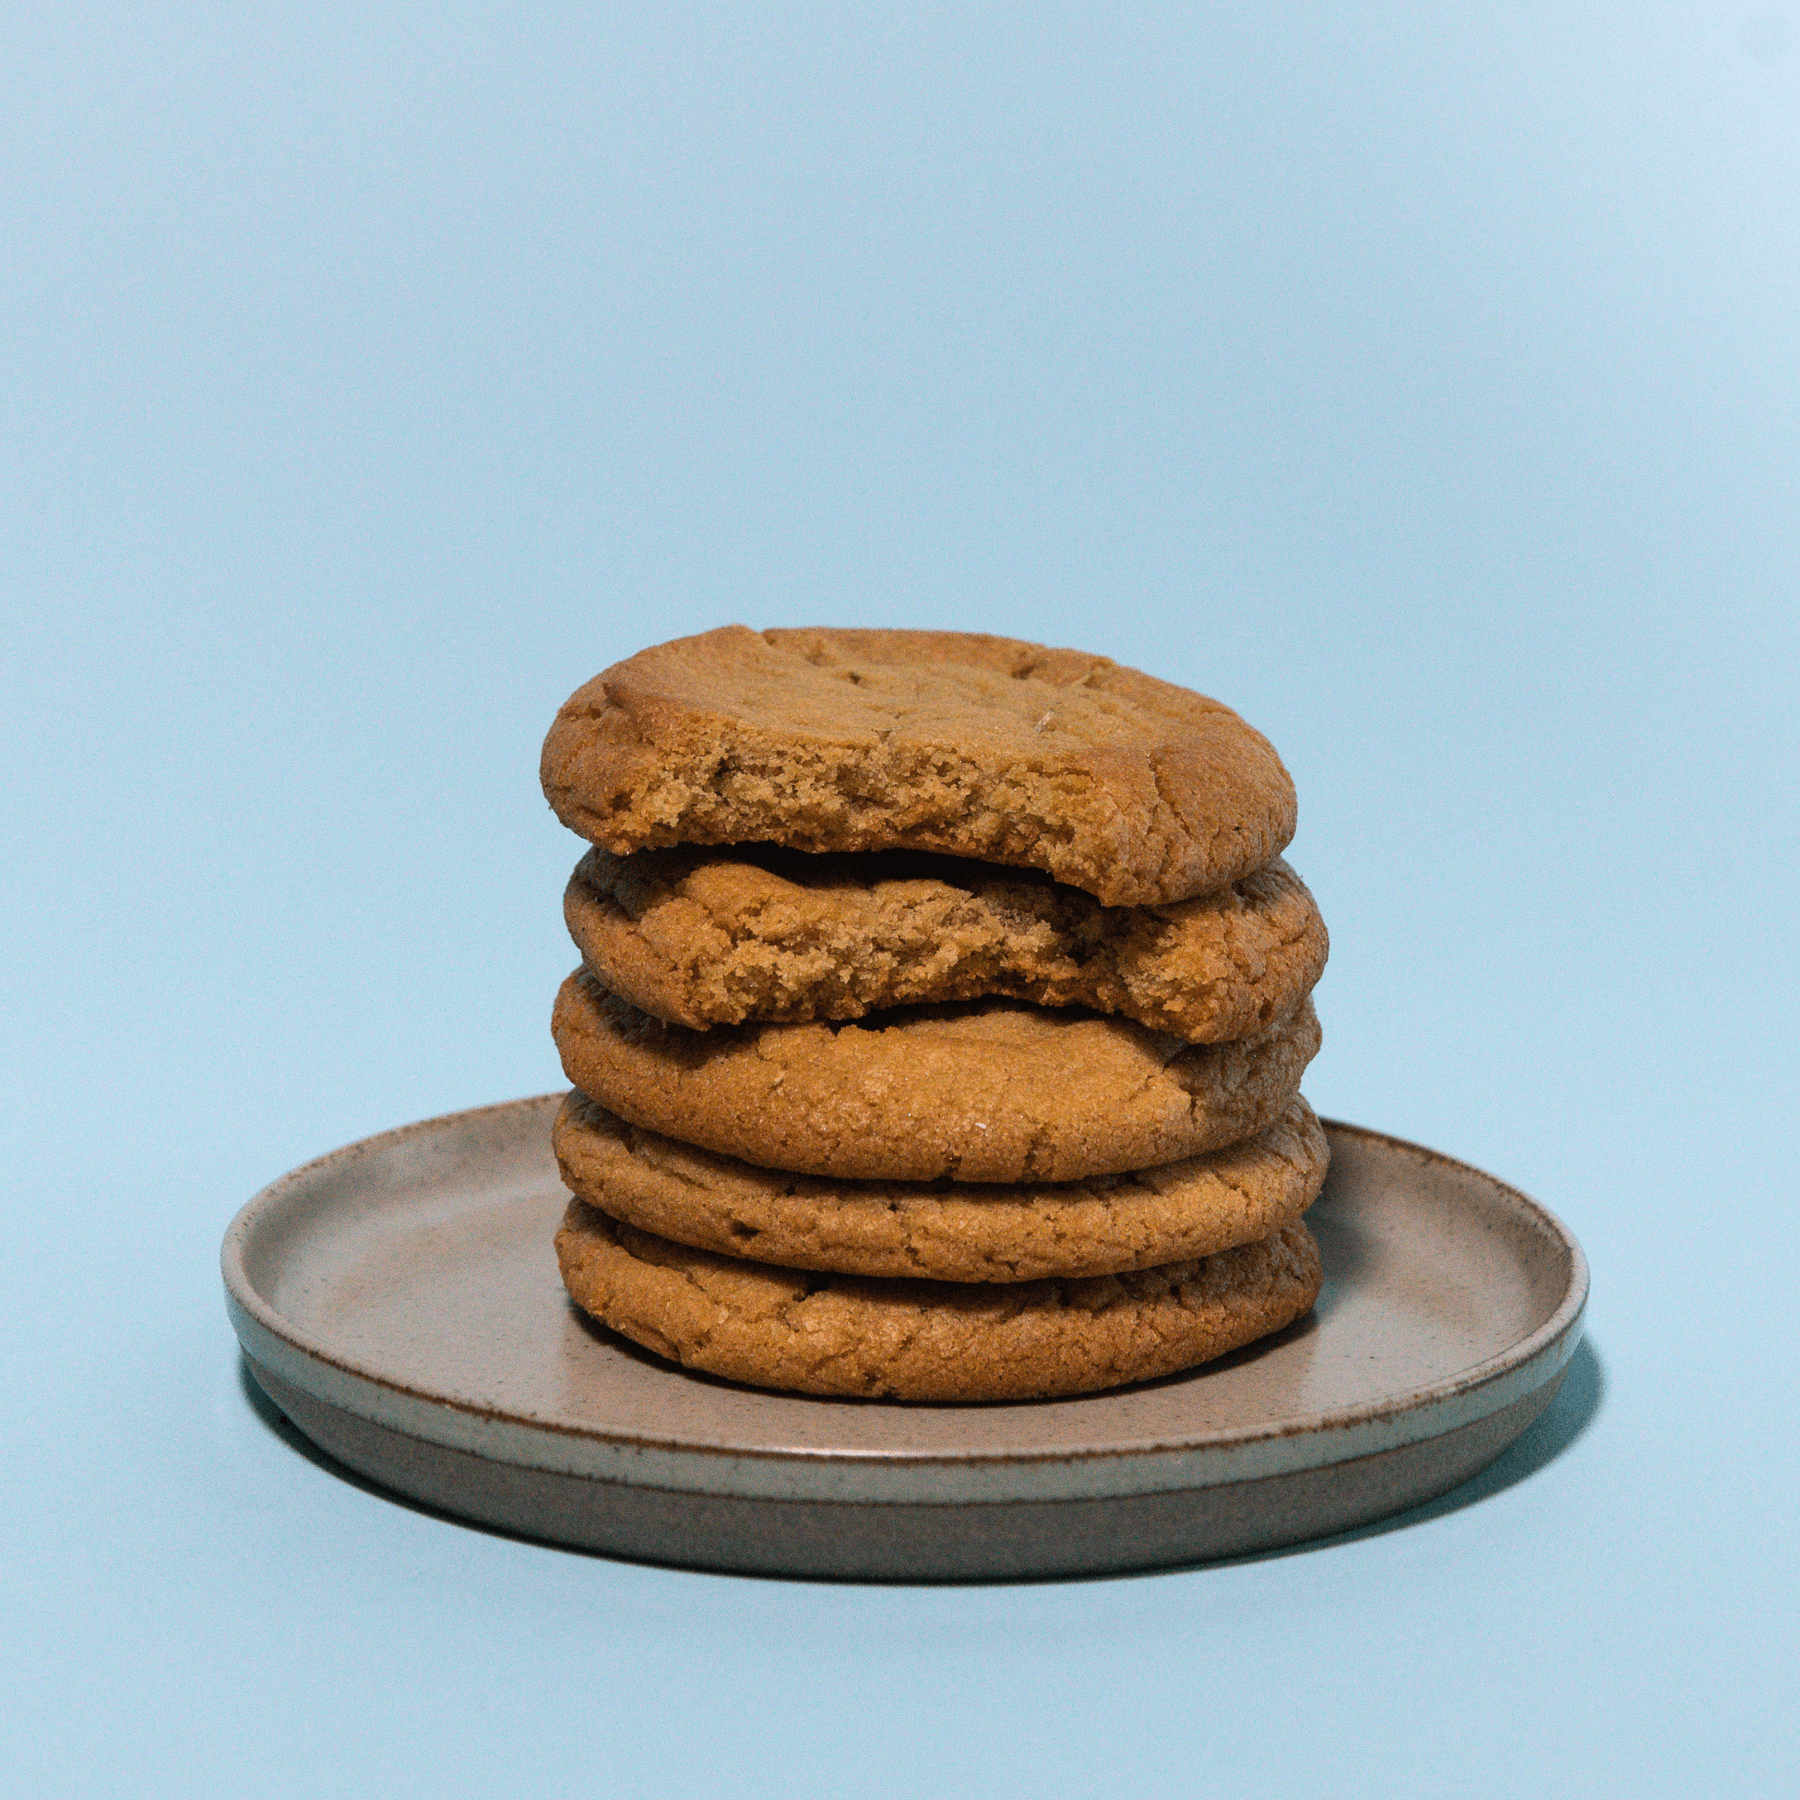 Rosemary Balsamic cookies stacked